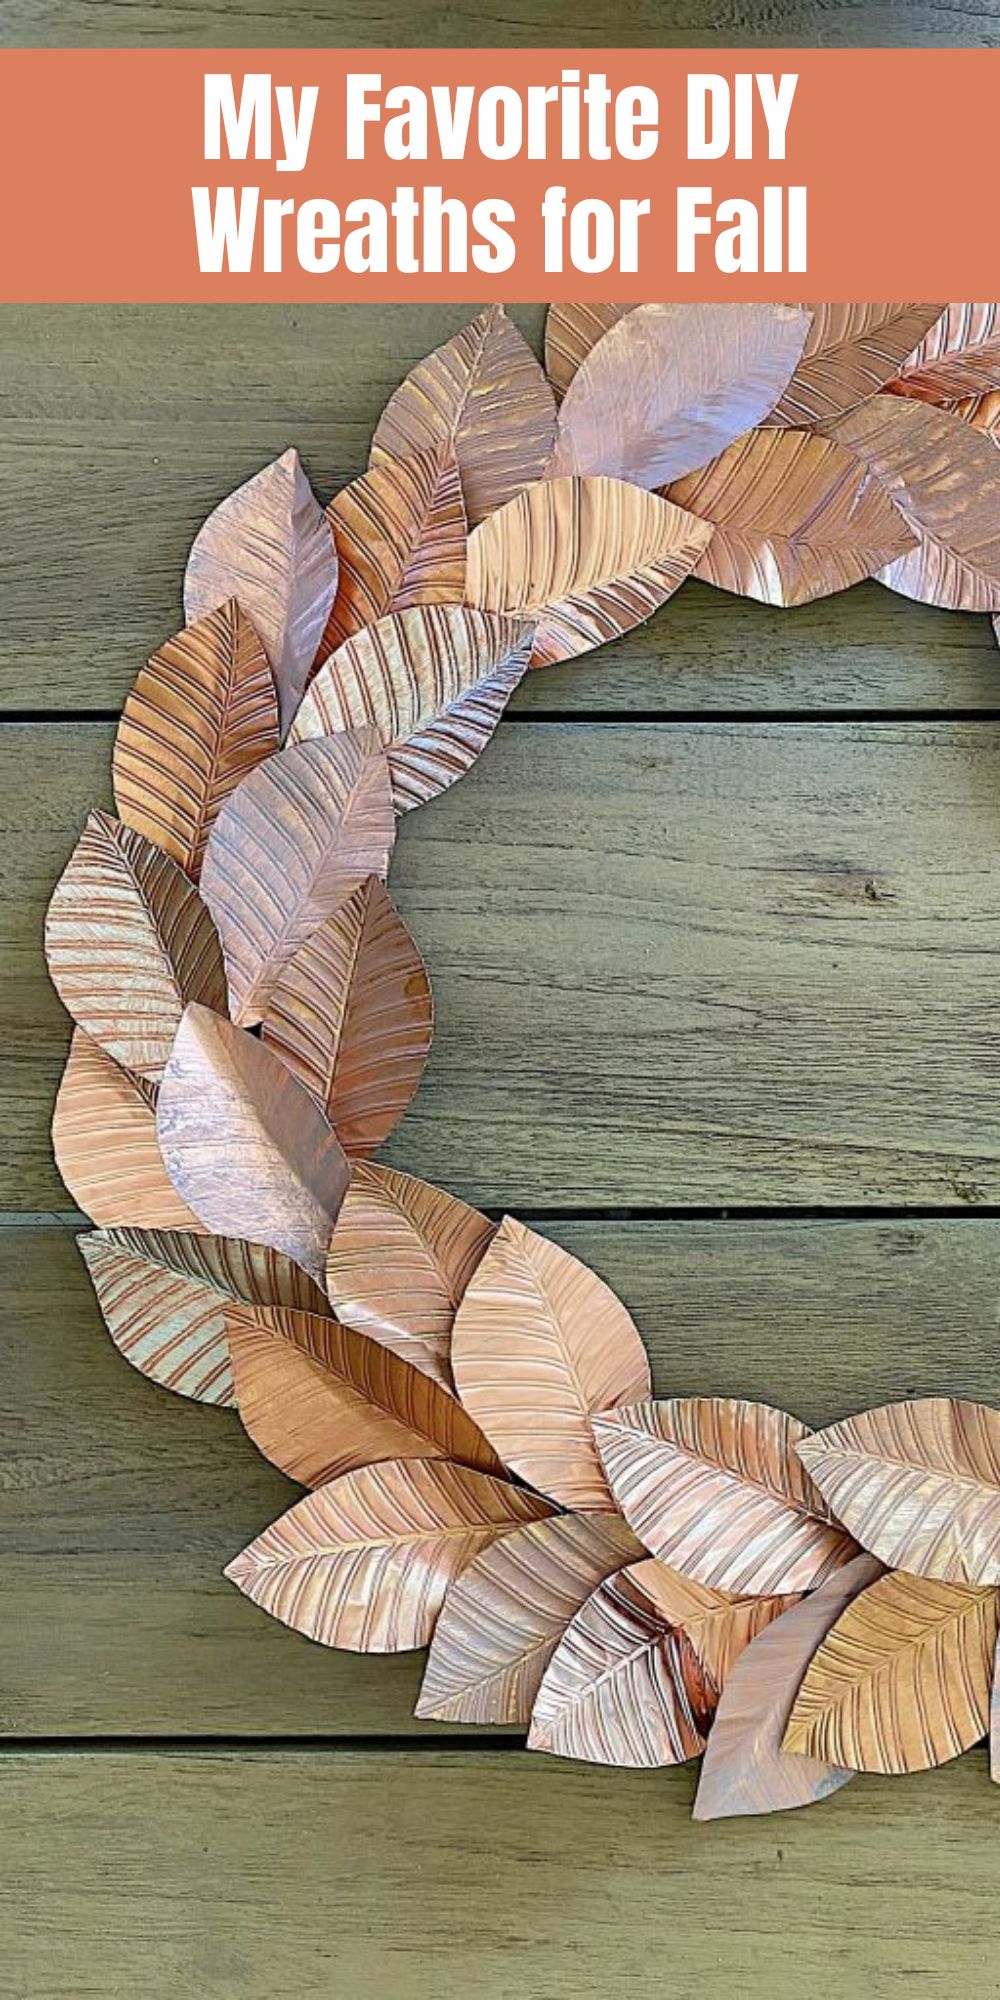 This is my favorite DIY wreath ever! Today I am sharing how to make this copper metal wreath plus more favorite wreaths for fall.